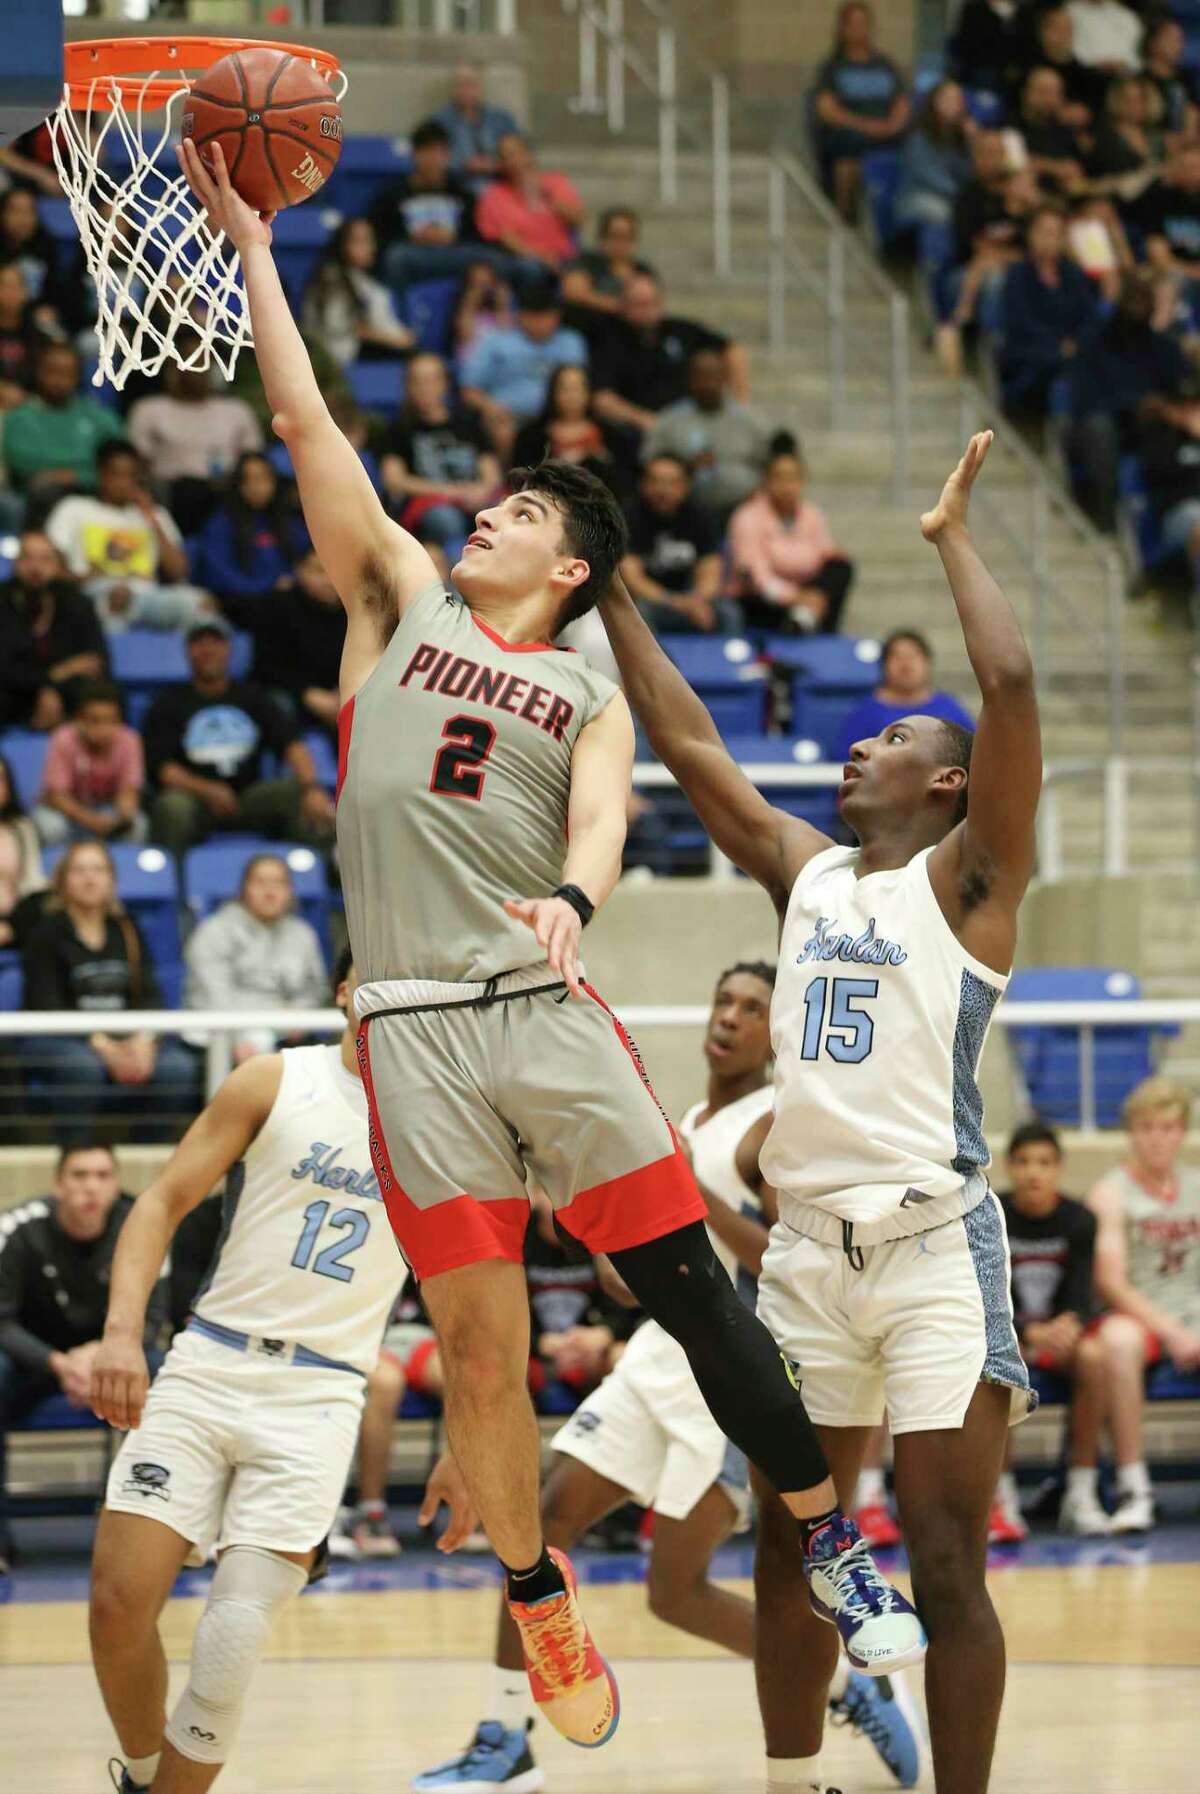 Sharyland Pioneer's Derek Luna (02) scores against Harlan's Ja'kobe Barkley (15) during their Boys 5A Regional semifinal basketball game on Friday, Mar. 6, 2020. Harlan defeated Pioneer, 71-65, to advance to the regional final.